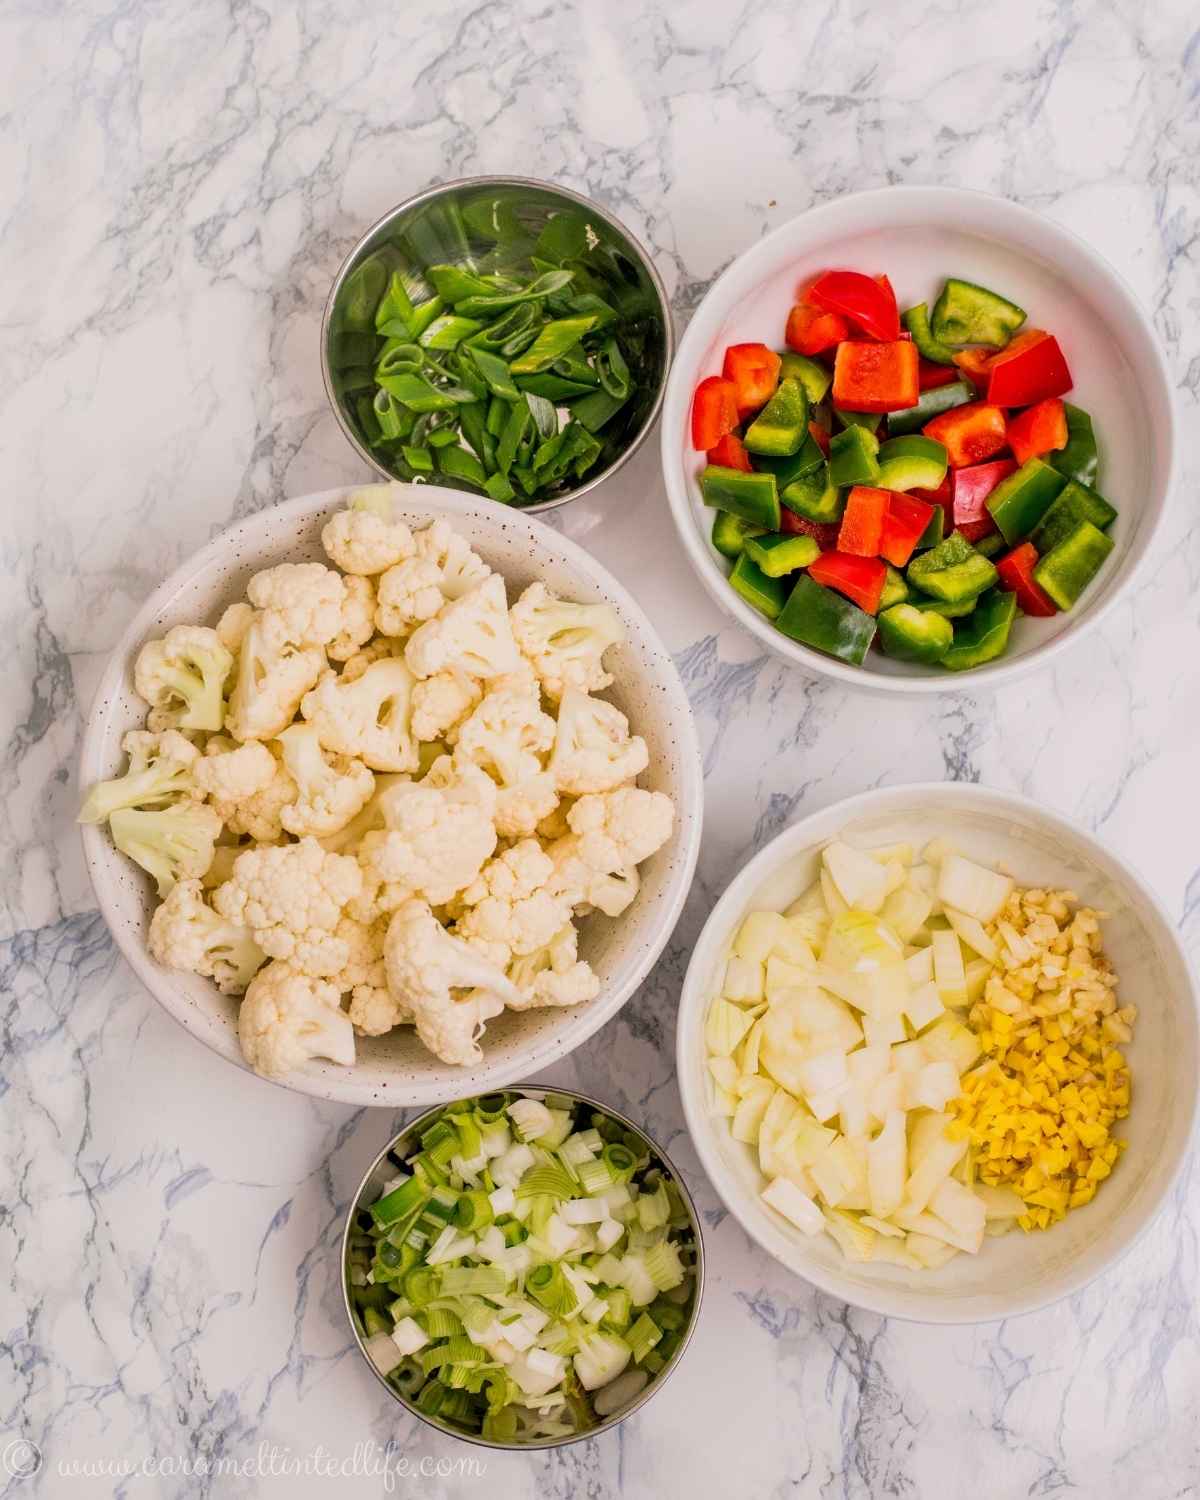 Ingredients for making sweet and sour crispy cauliflower